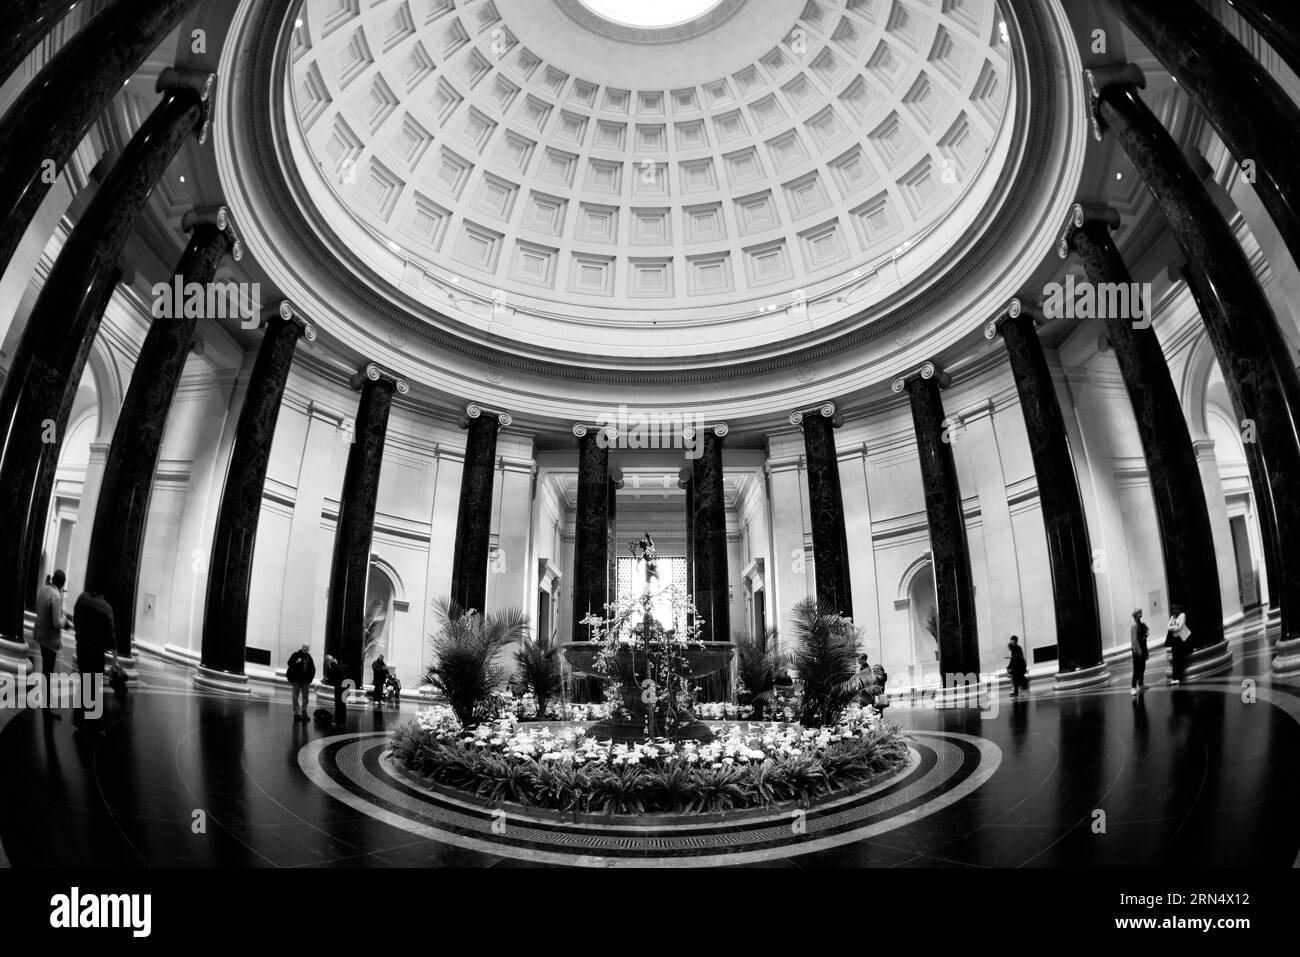 WASHINGTON DC, United States — A wide-angle photo of the interior of the rotunda at the heart of the National Gallery of Art in Washington DC. The rotunda of the National Gallery of Art shines with architectural details and ambient light. Serving as the heart of the gallery, this central space not only offers a calm respite for visitors but also exemplifies the institution's dedication to art and culture in the nation's capital. Stock Photo